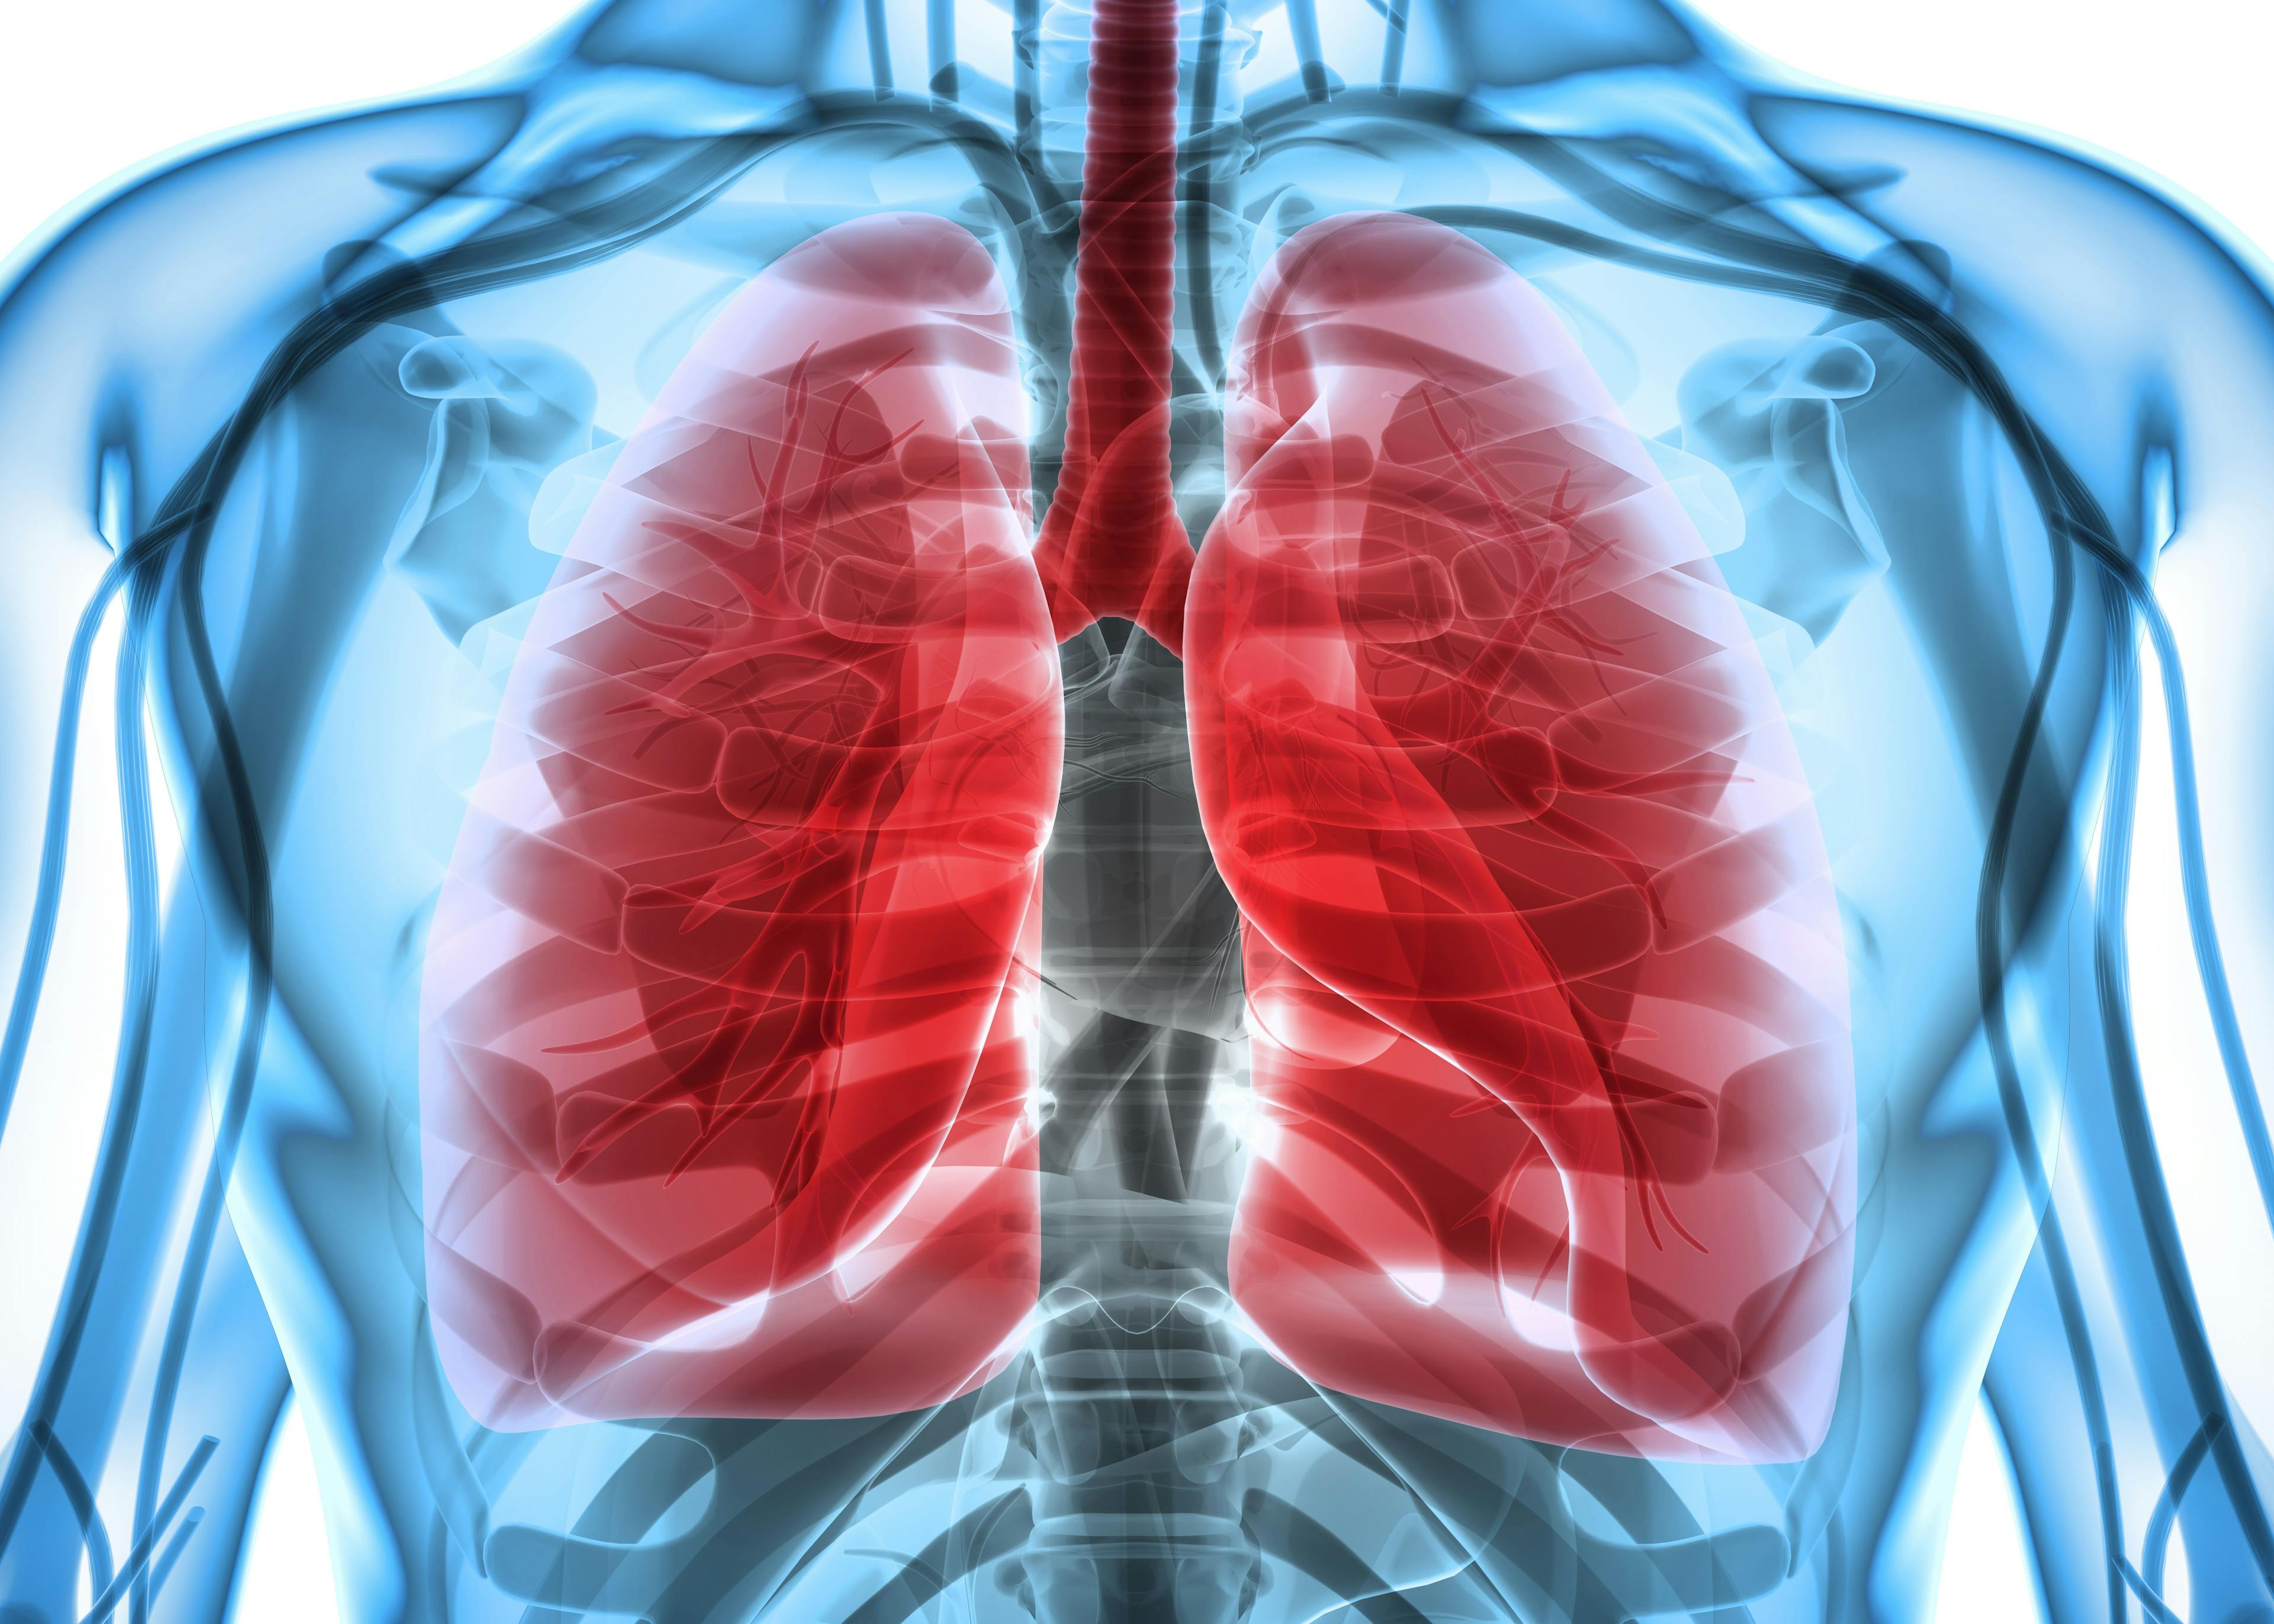 Illustration of a human lung